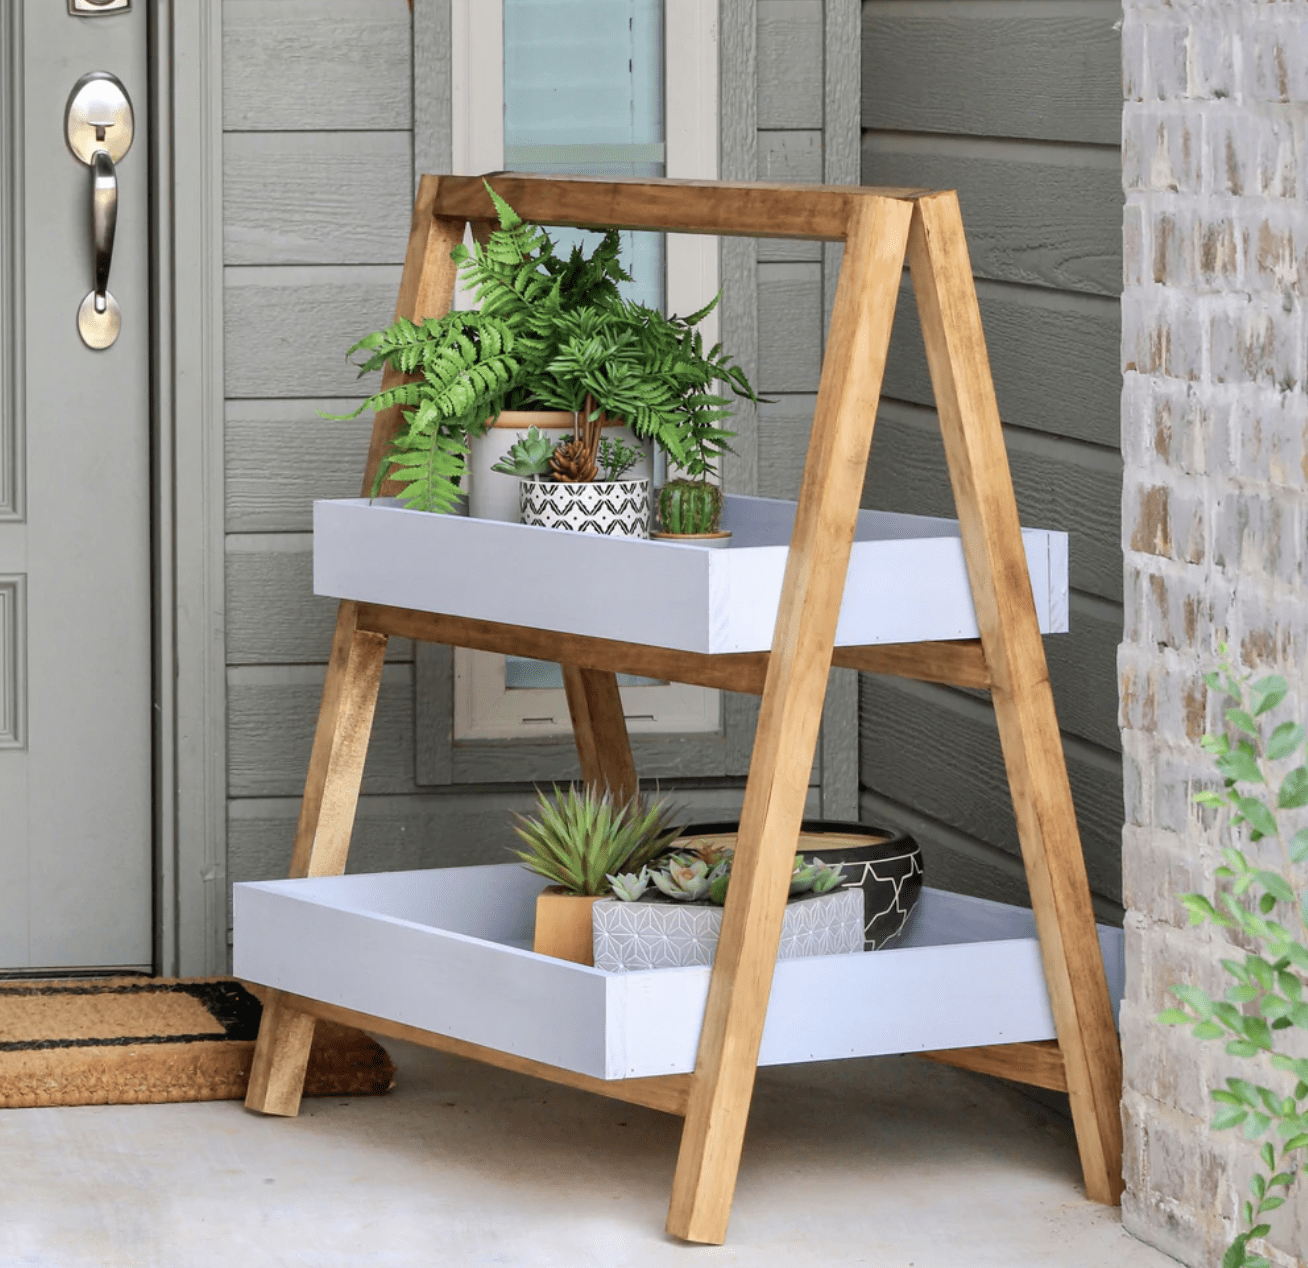 Modern a frame outdoor plant stand with wood